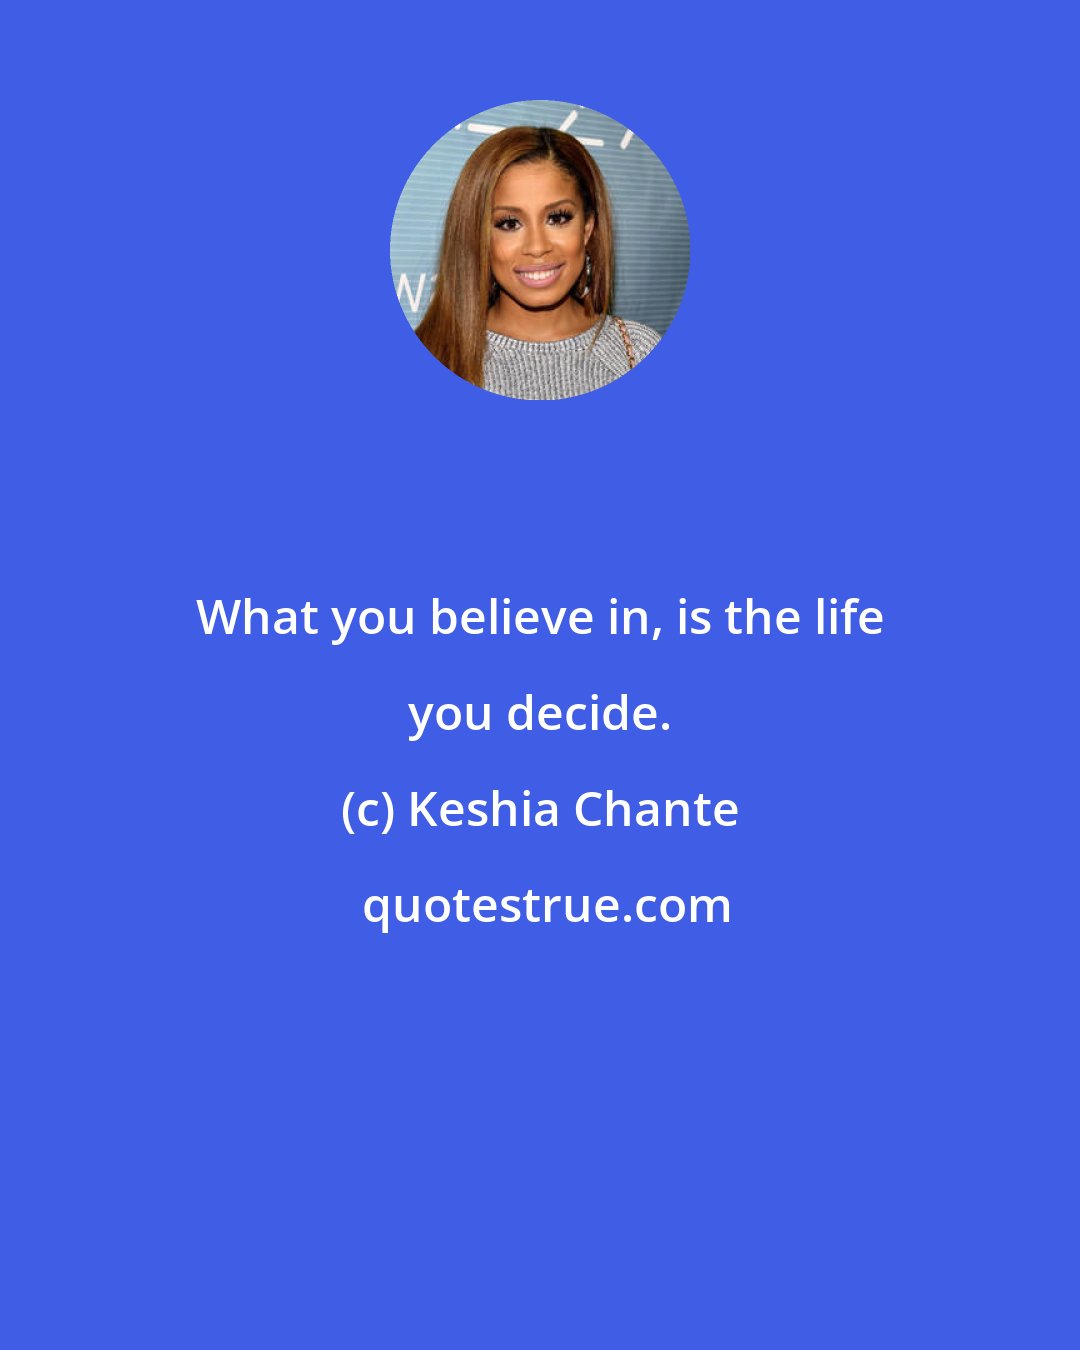 Keshia Chante: What you believe in, is the life you decide.